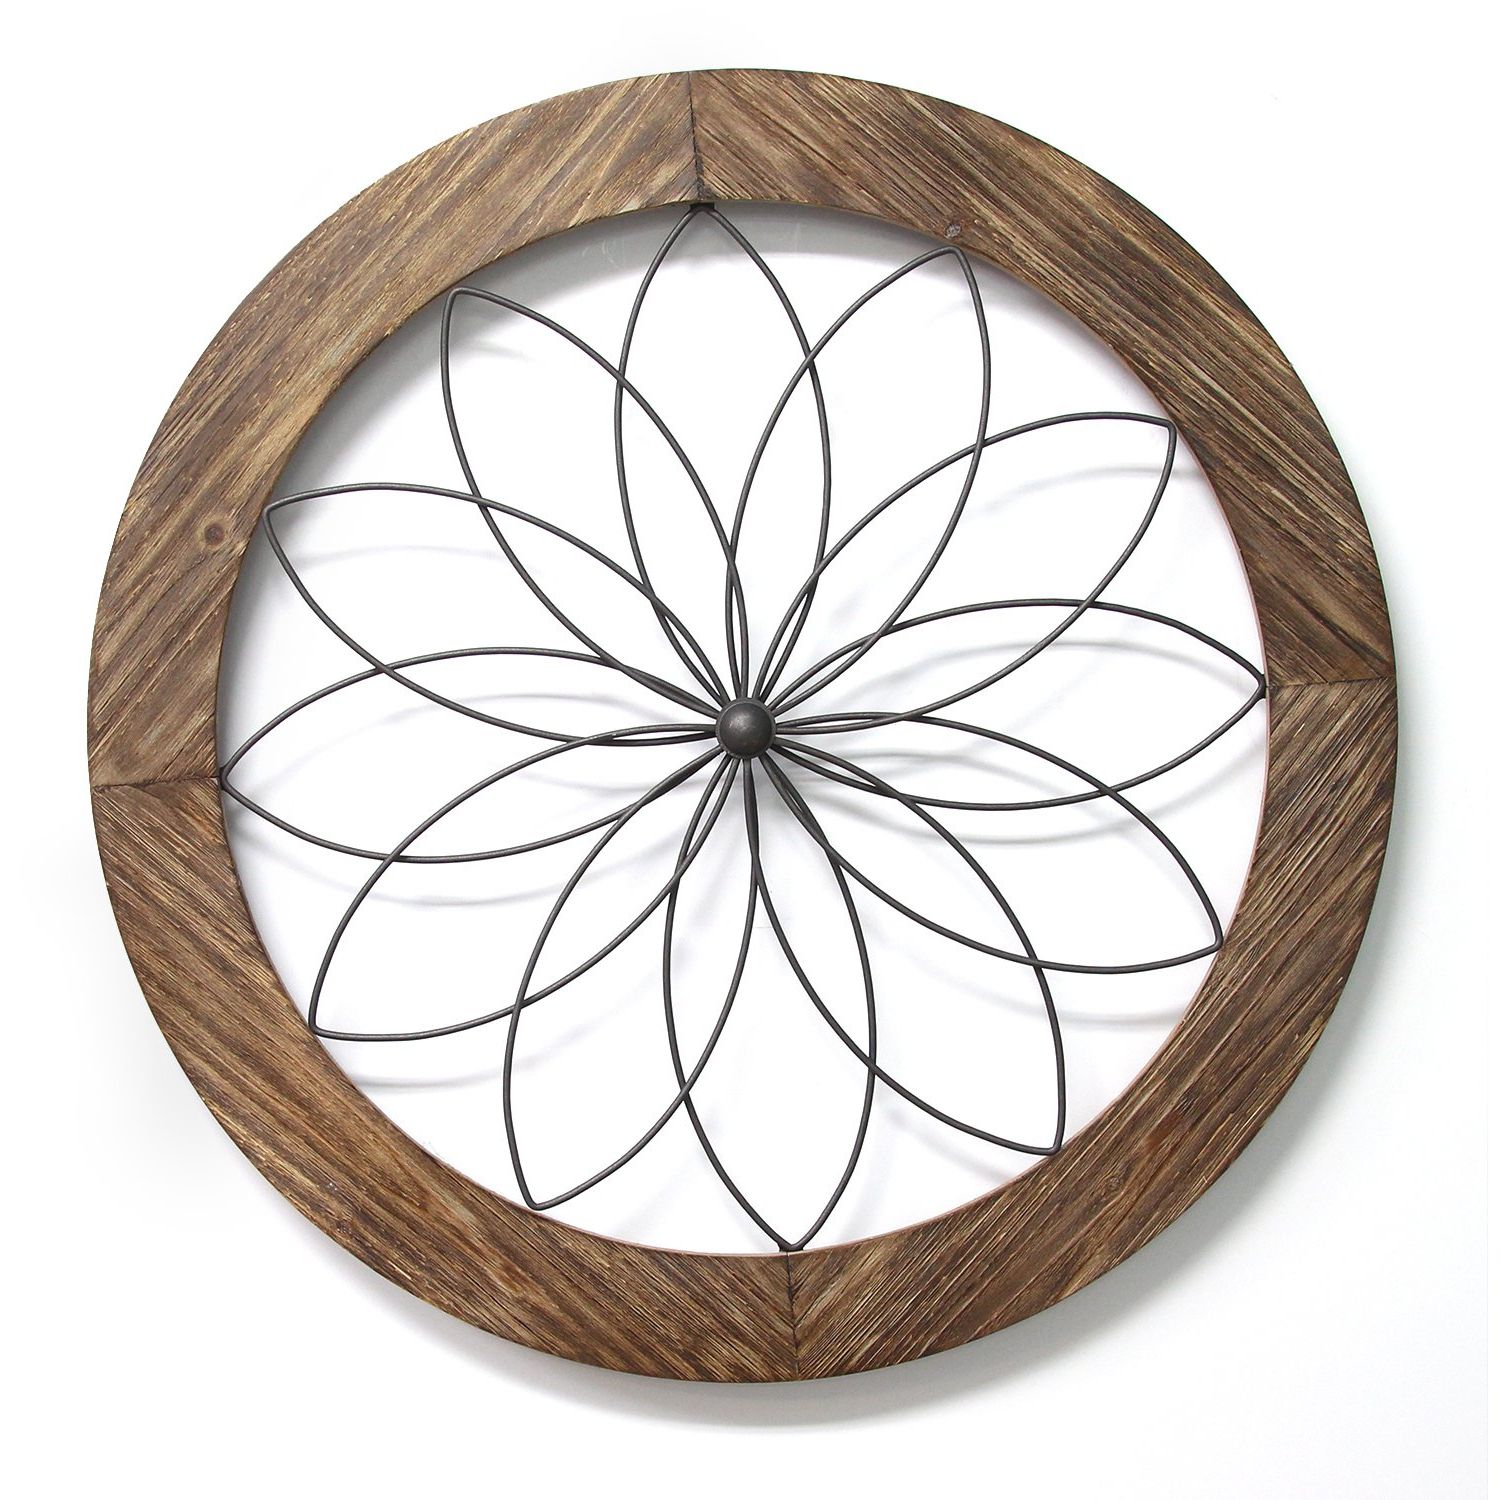 Wooden Blocks Metal Wall Art Within Best And Newest Round Wood And Metal Medallion Wall Decor – Walmart (View 15 of 15)